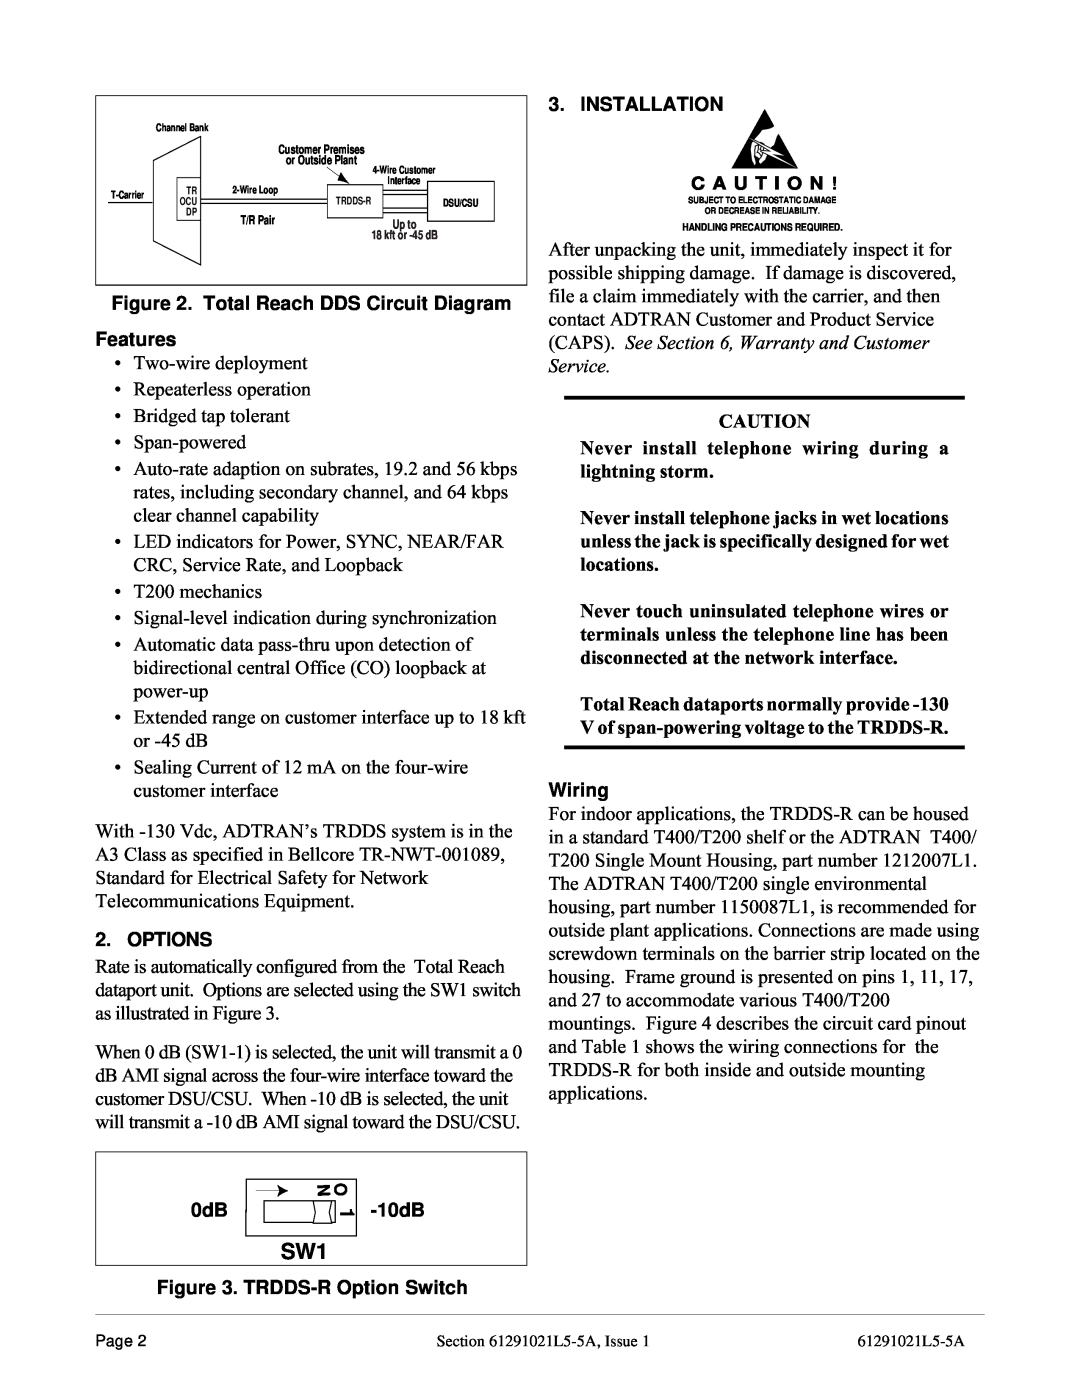 ADTRAN warranty Total Reach DDS Circuit Diagram Features, Options, 10dB, TRDDS-R Option Switch, Installation, Wiring 